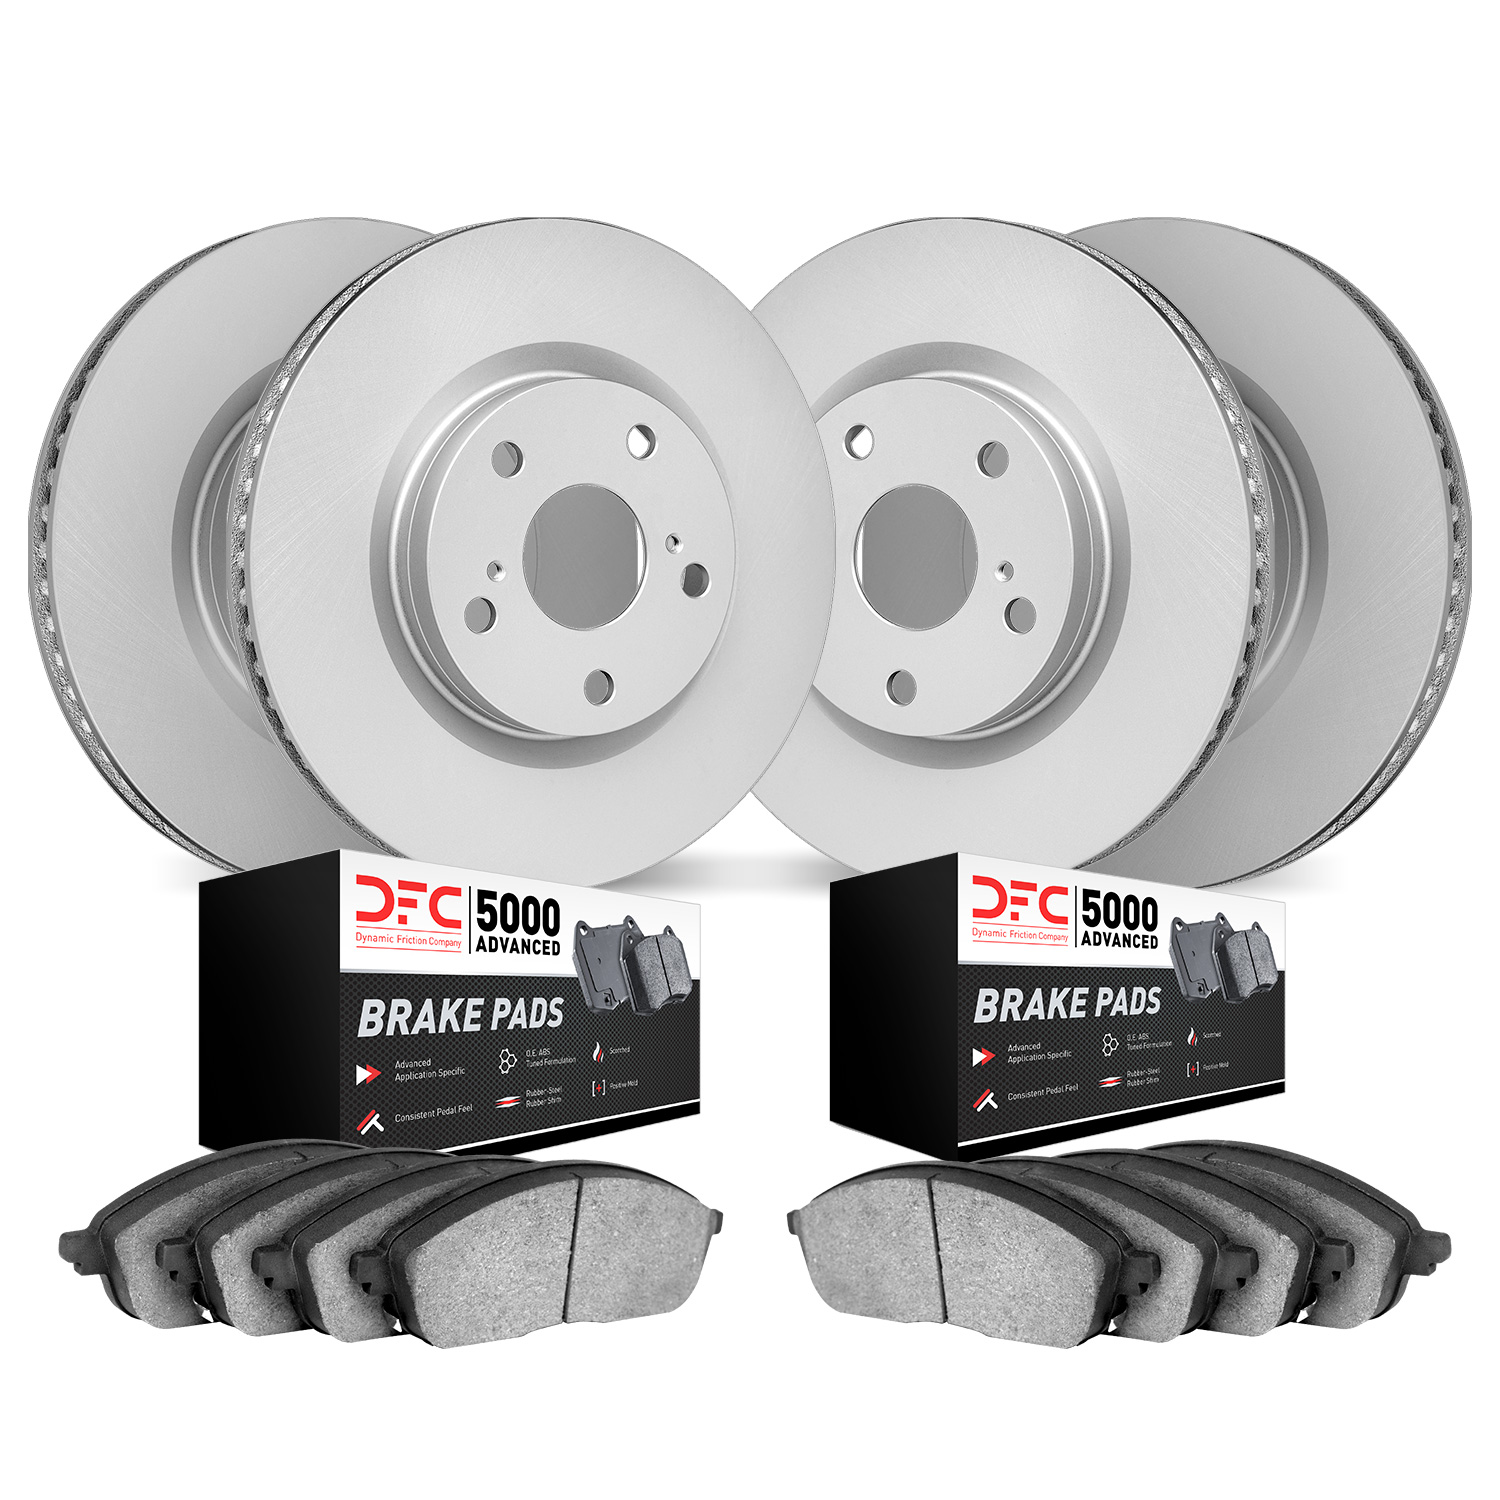 4504-45005 Geospec Brake Rotors w/5000 Advanced Brake Pads Kit, 1998-2002 GM, Position: Front and Rear